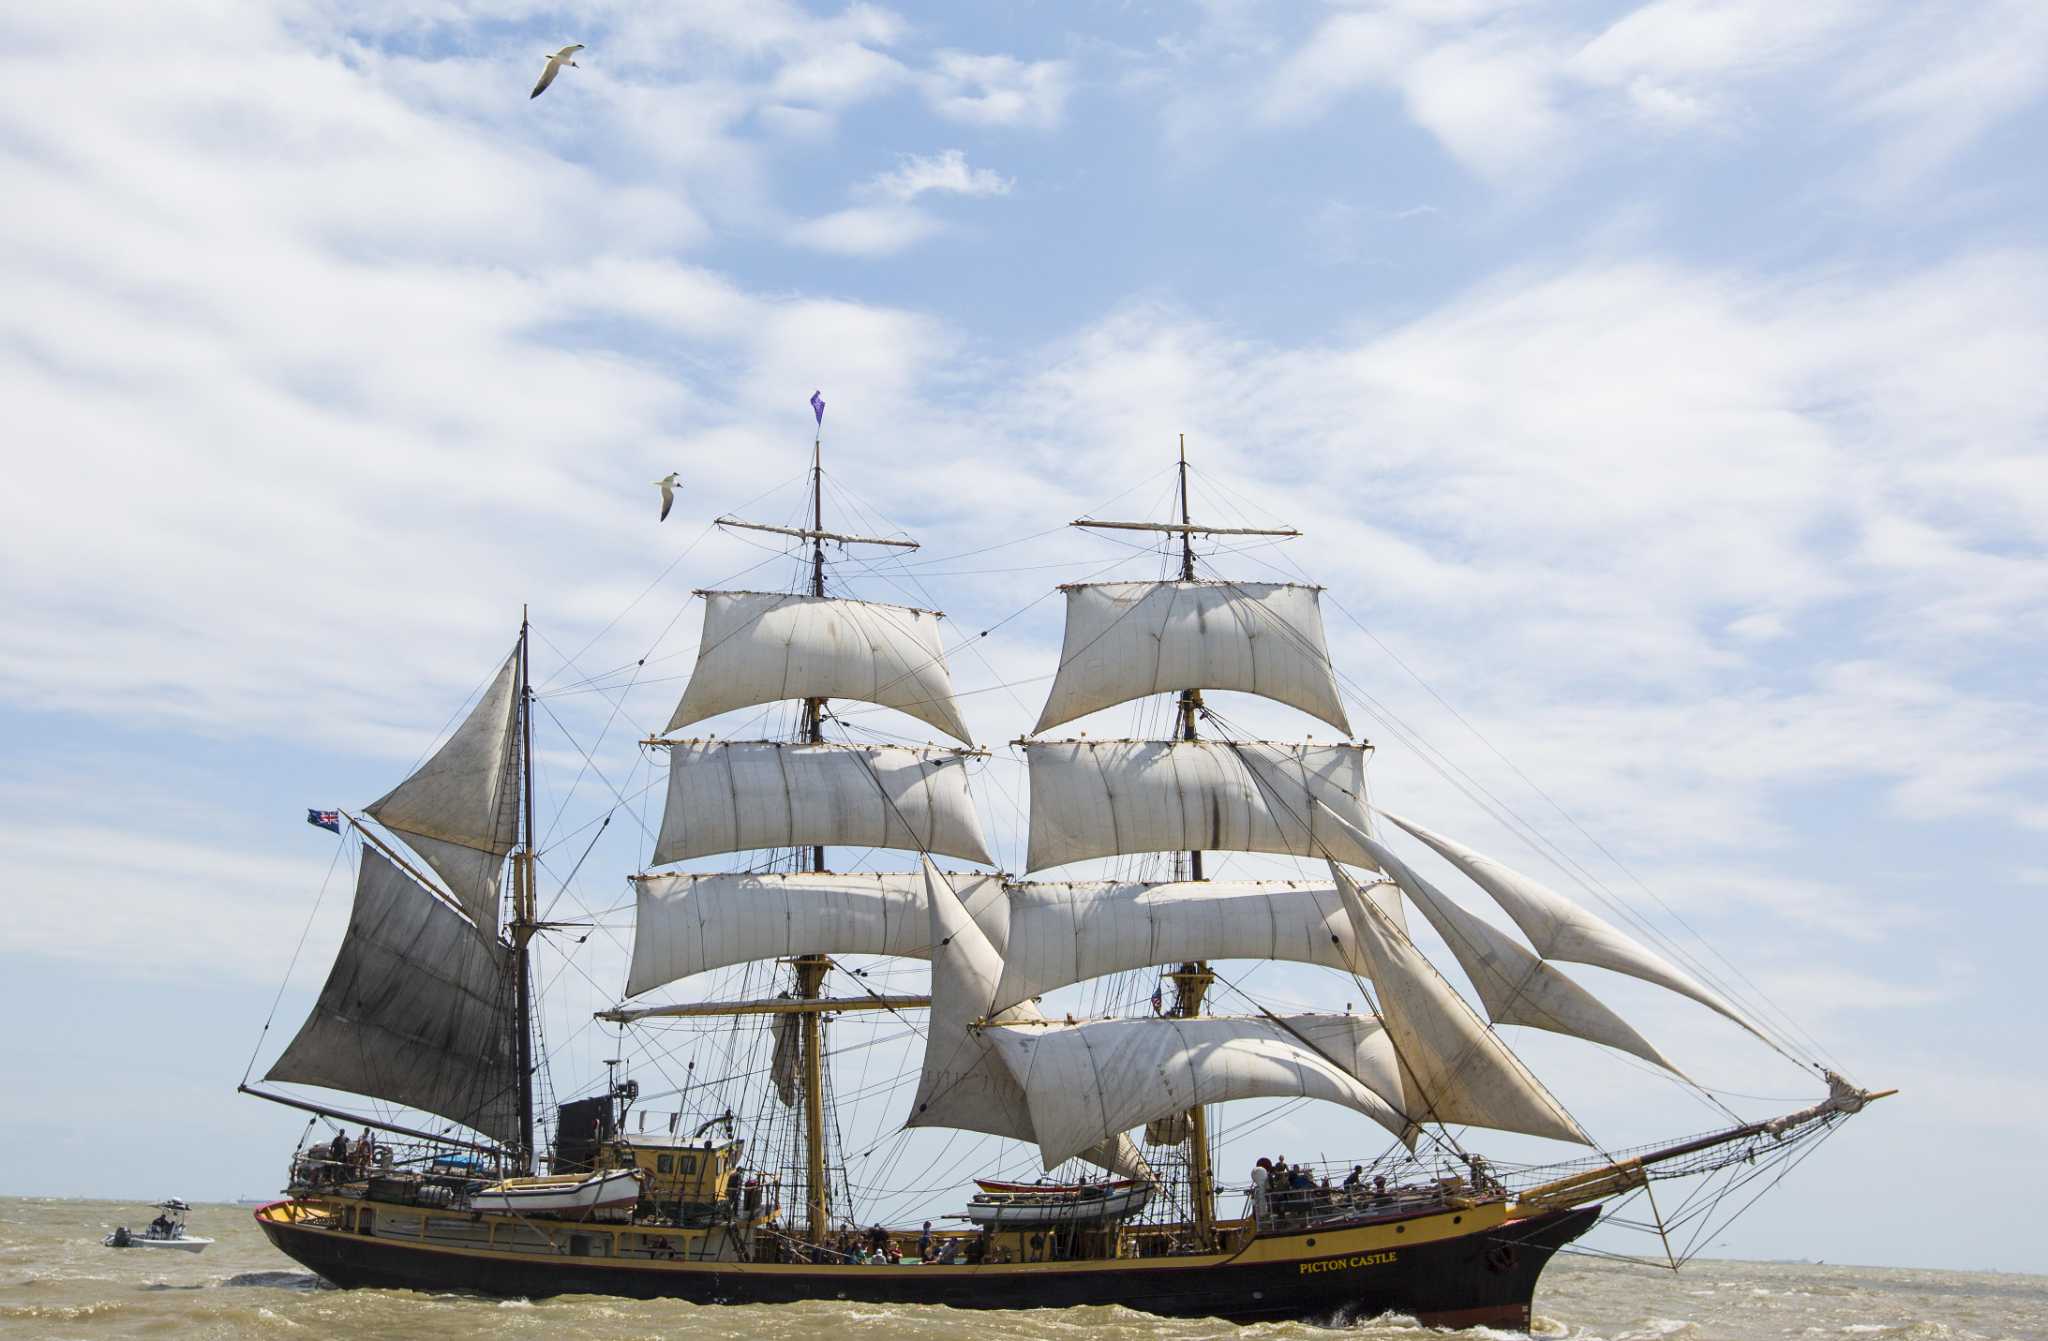 Galveston’s Parade of Tall Ships delight maritime enthusiasts, amateur